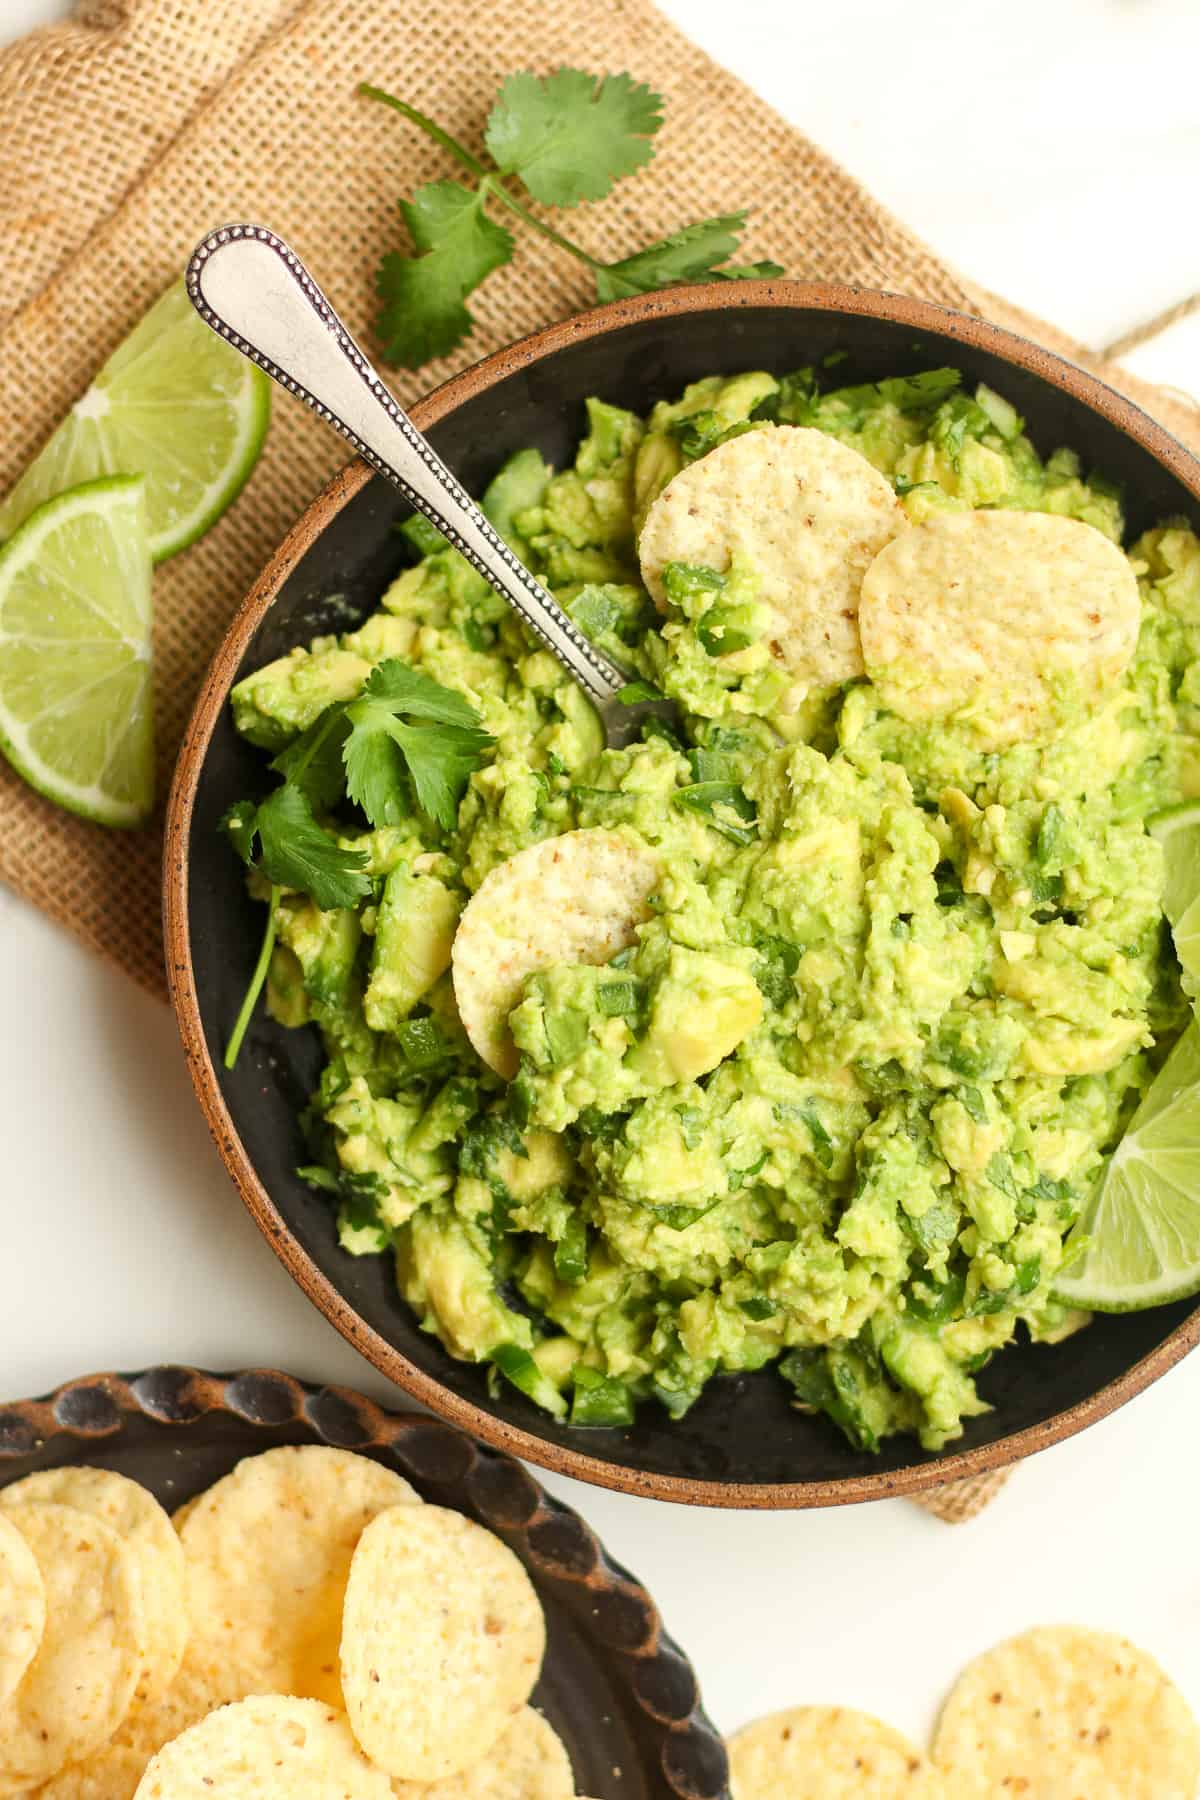 A bowl of guac with chips inside the guac and a spoon.